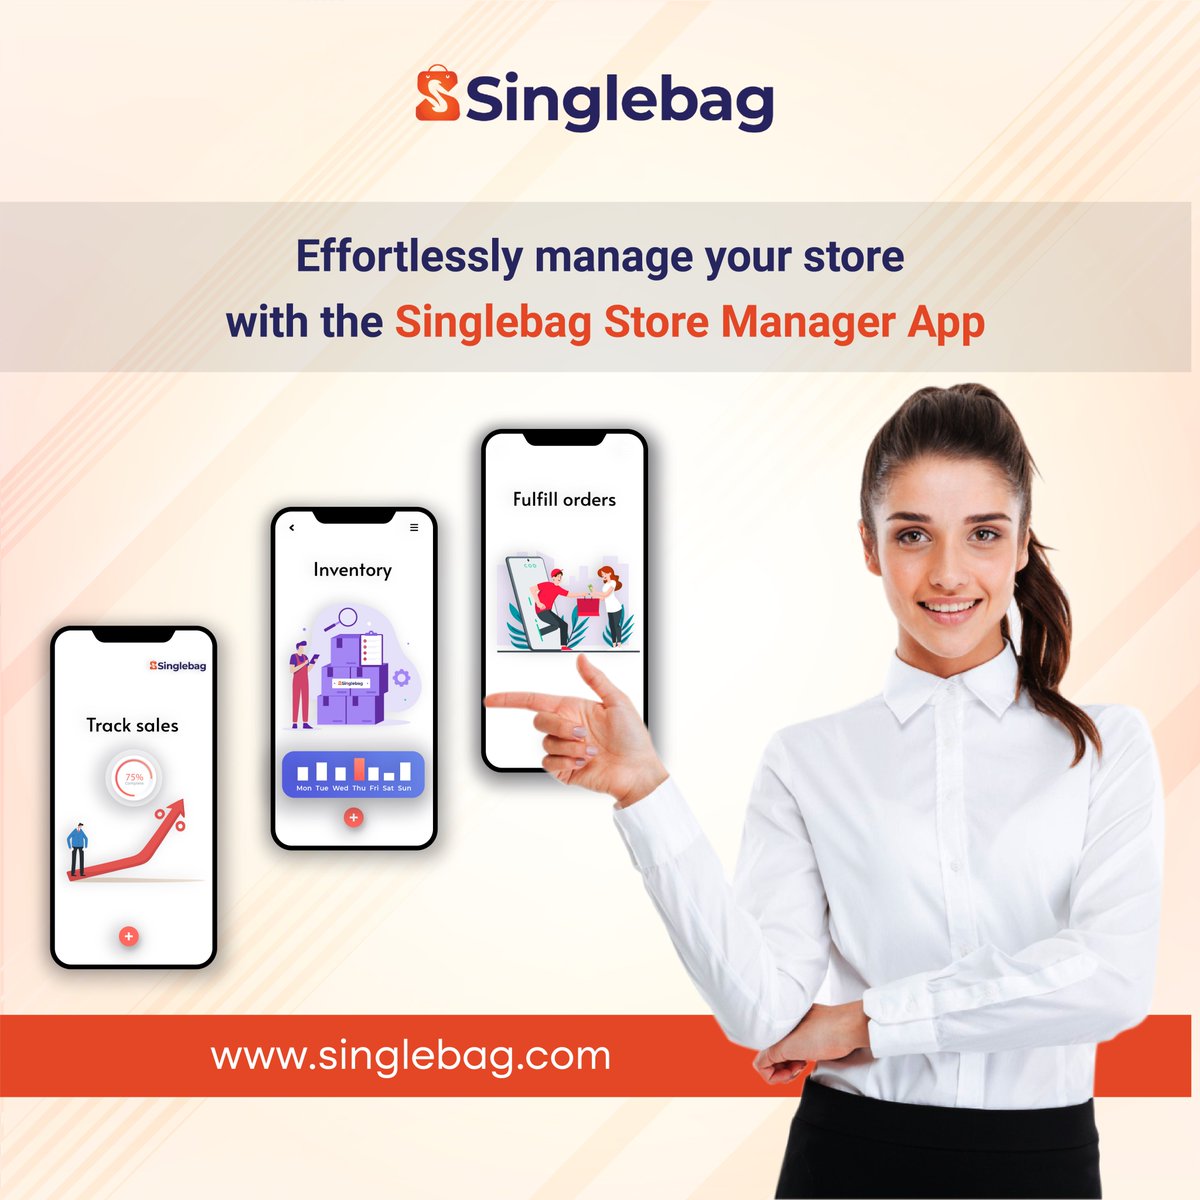 Easily manage your store from anywhere with Singlebag Store Manager App. Update inventory, fulfill orders, and track sales with ease.

🎯Visit Us here 👉singlebag.com

#storemanagement #inventorymanagement #onlinestore #singlebagstoremanagerapp #BusinessGrowth